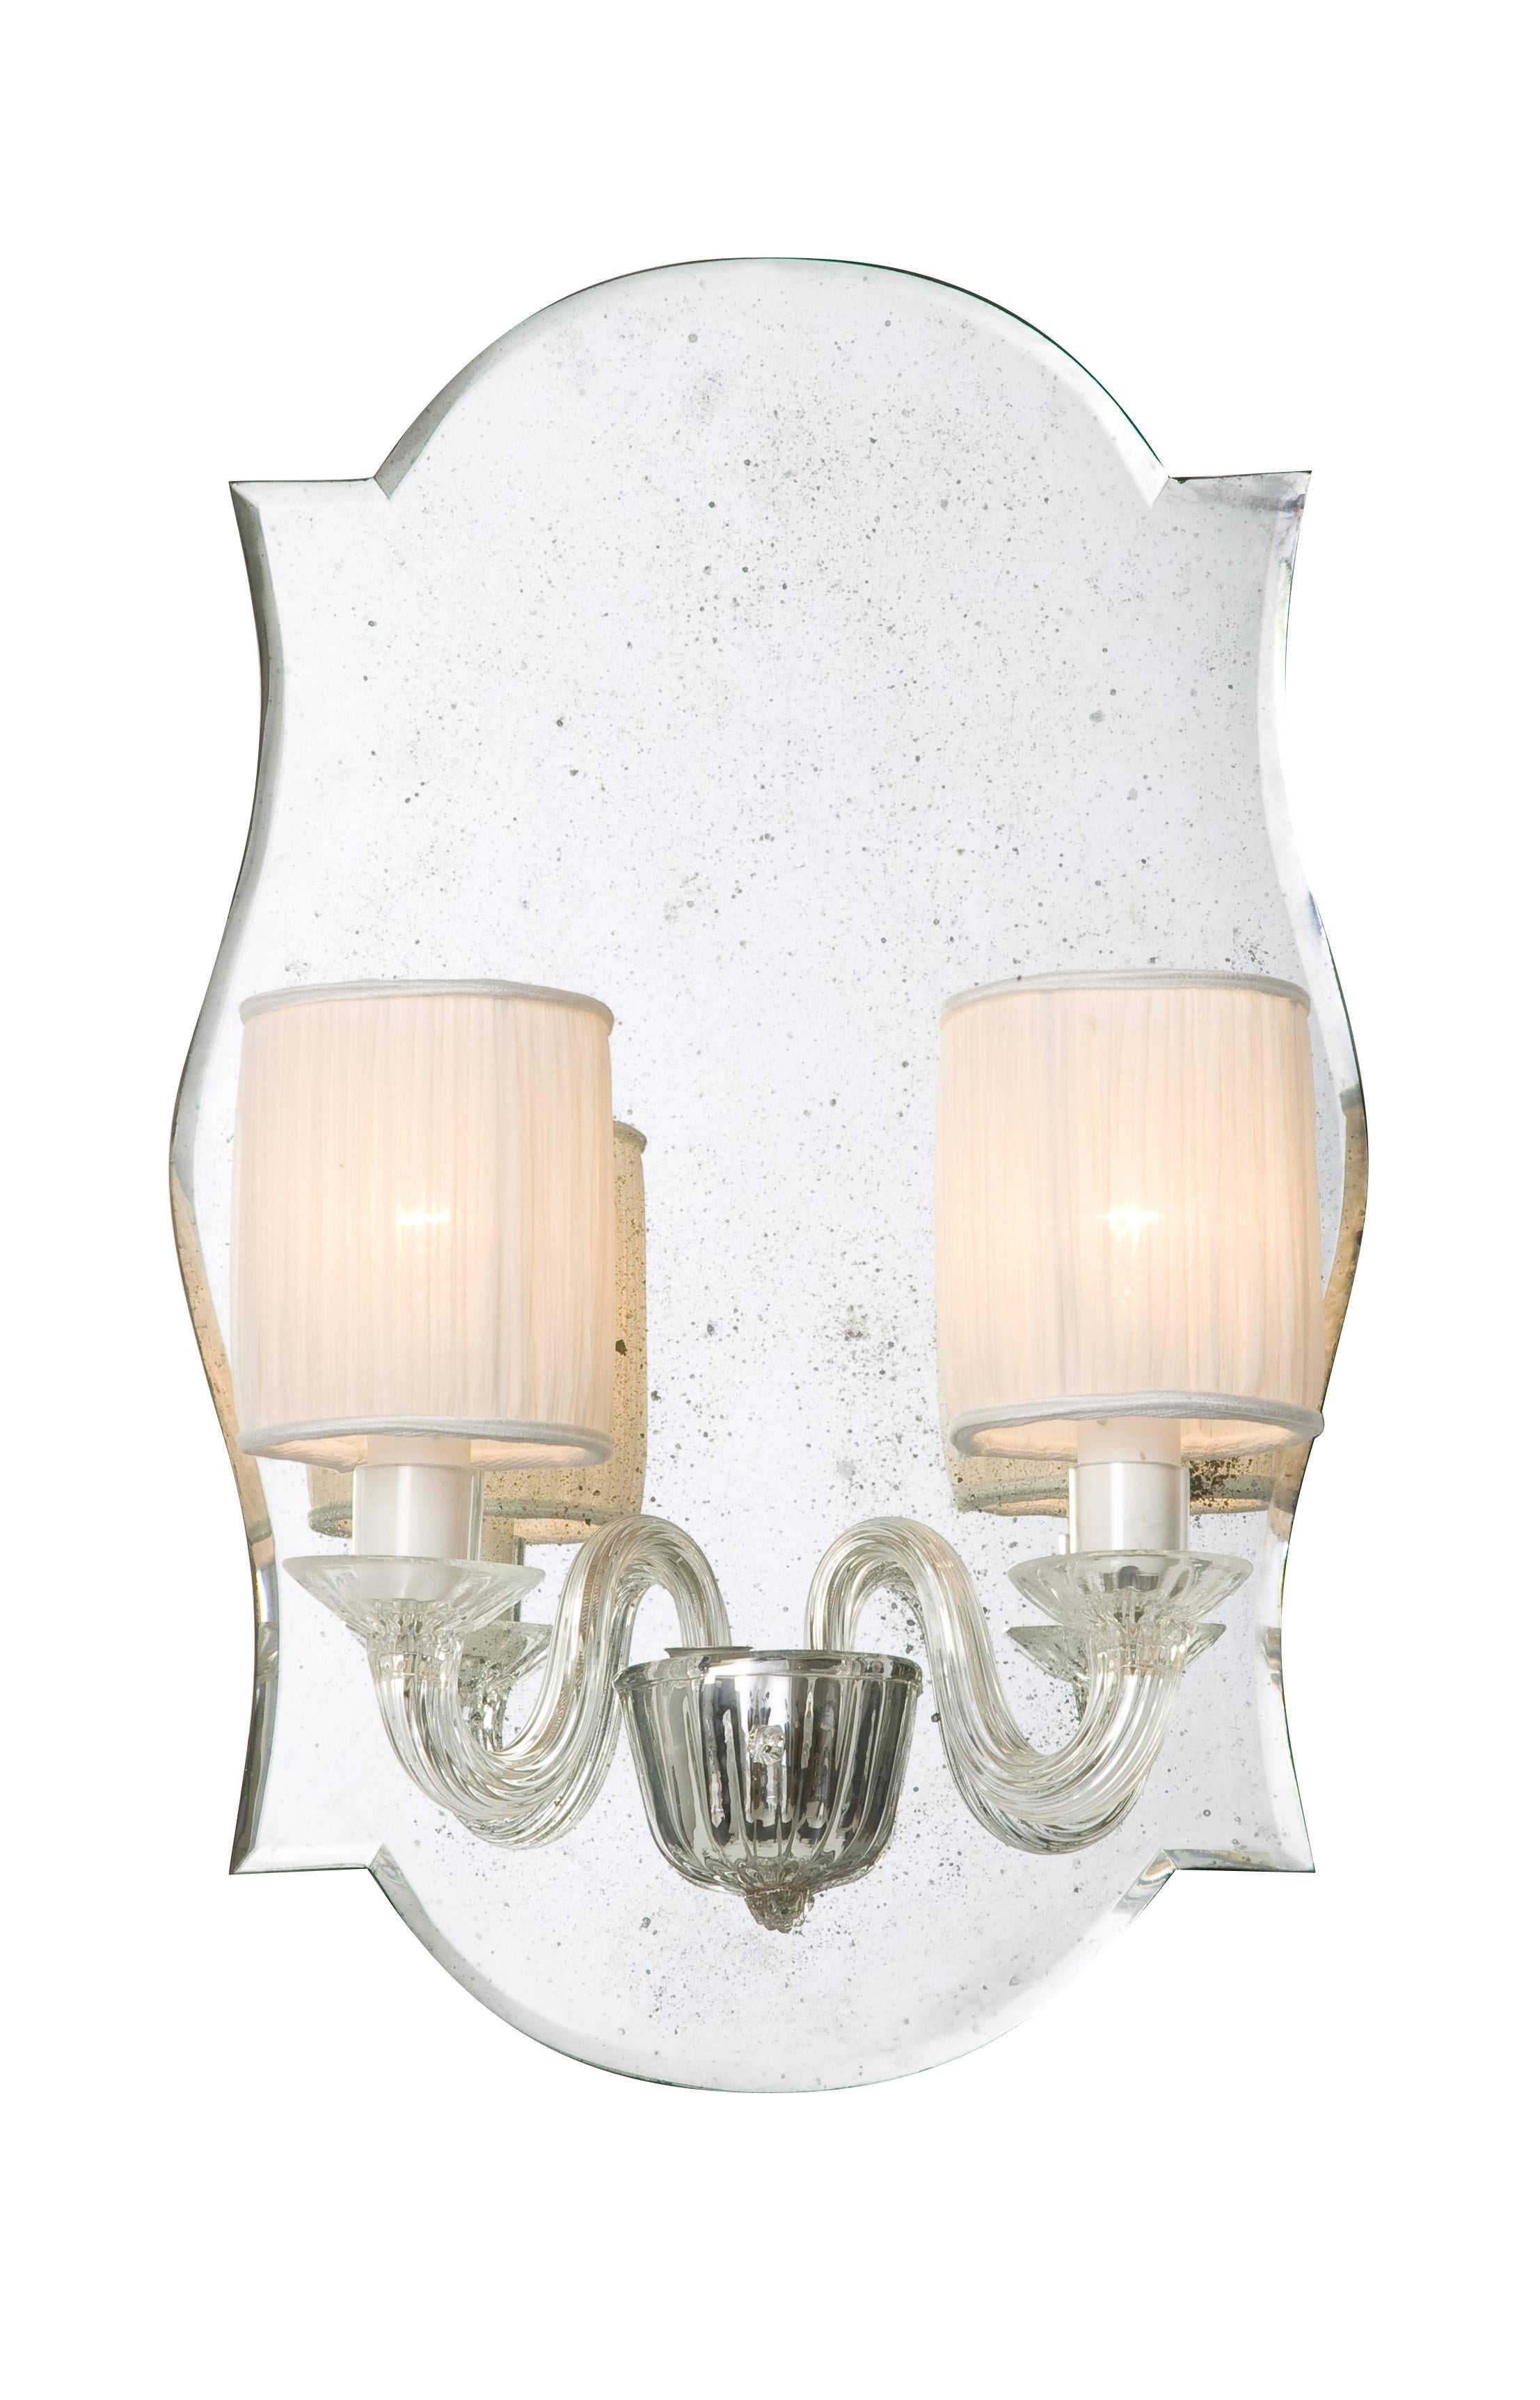 Hand blown Murano glass wall lights with straight ribbing finish in clear glass and fitted on an antique finish bevelled mirror. One pair only.
Two E14 bulb fittings.

Note: Pleated cream shades will be supplied with these wall lights. These are